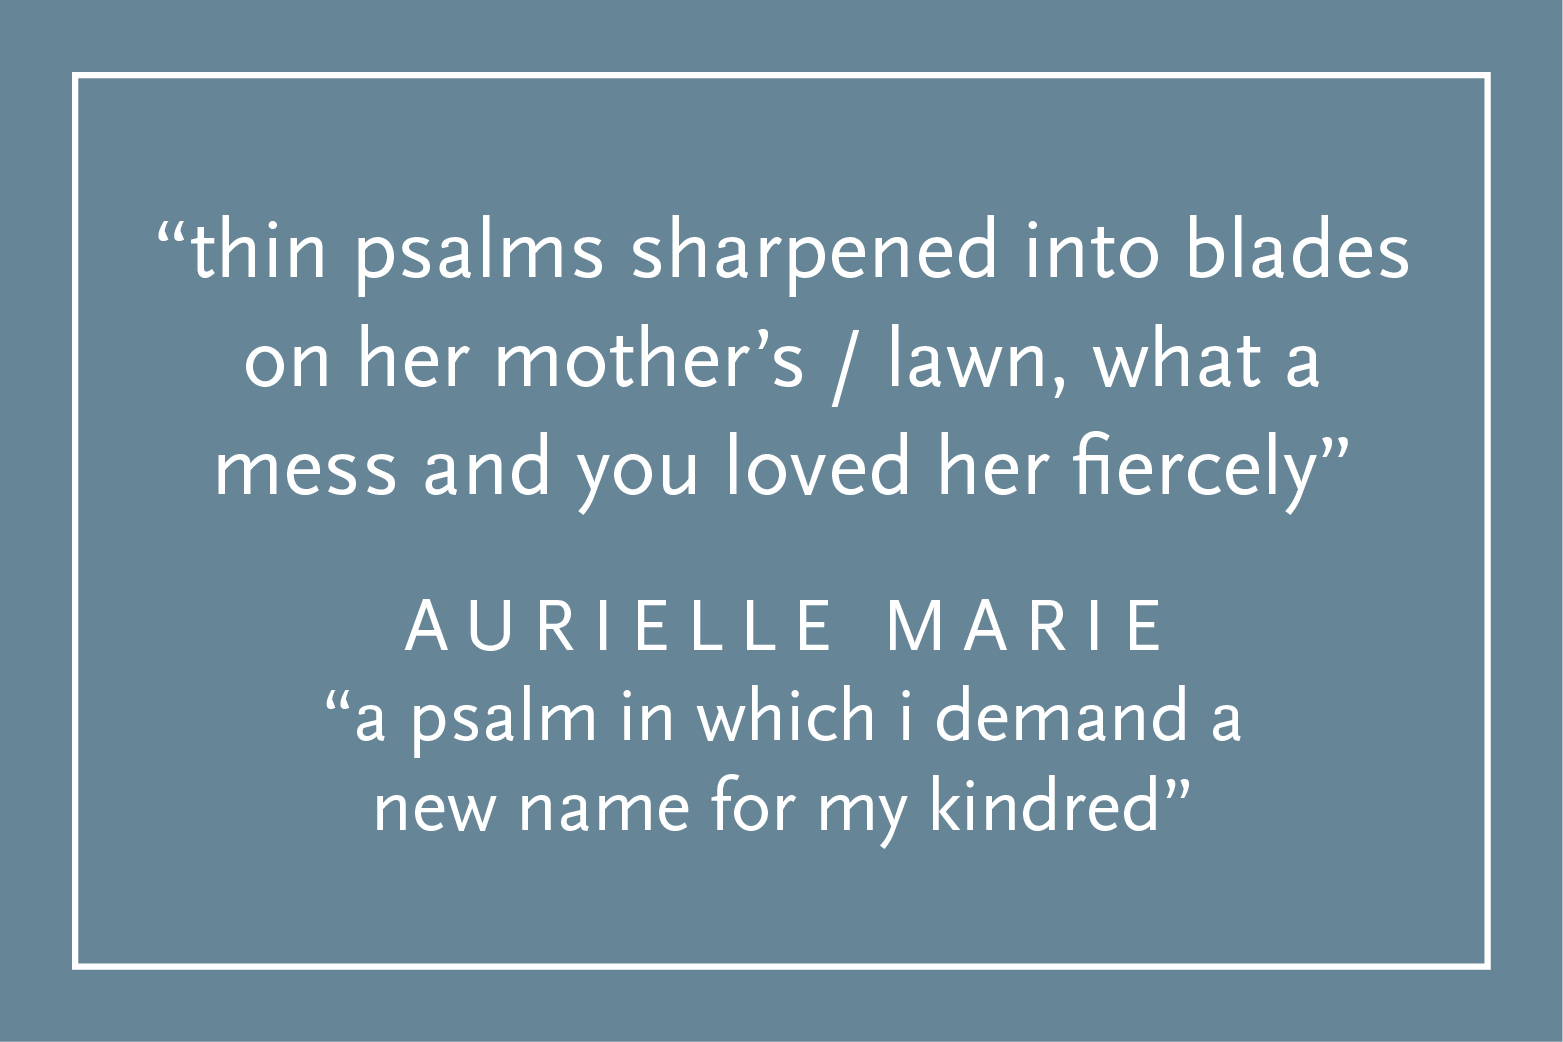 Teal background with white text and a white border: "thin psalms sharpened into blades on her mother’s / lawn, what a mess and you loved her fiercely", Aurielle Marie, "a psalm in which i demand a new name for my kindred"